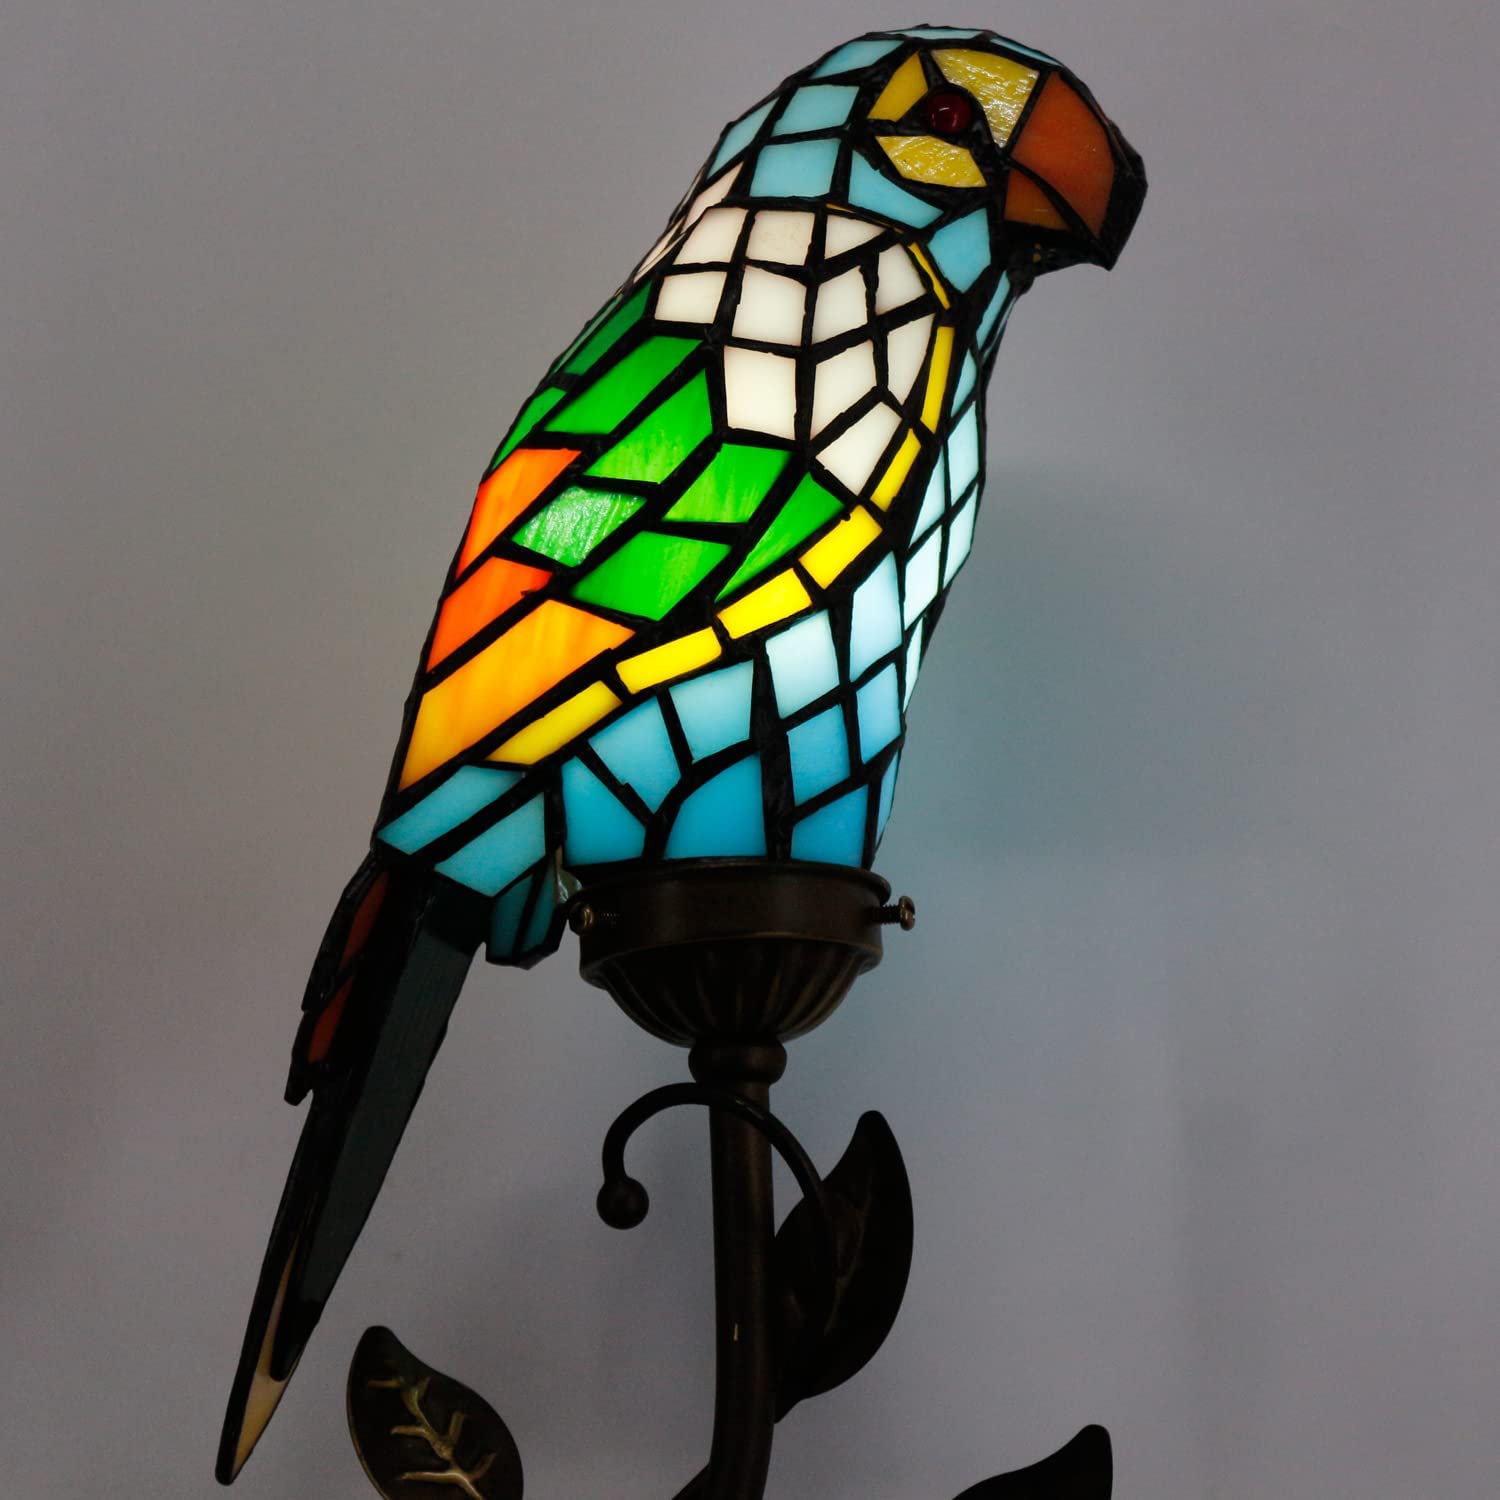 Tiffany Parrot Lamp Handmade Colorful Stained Glass Birds Reading Light